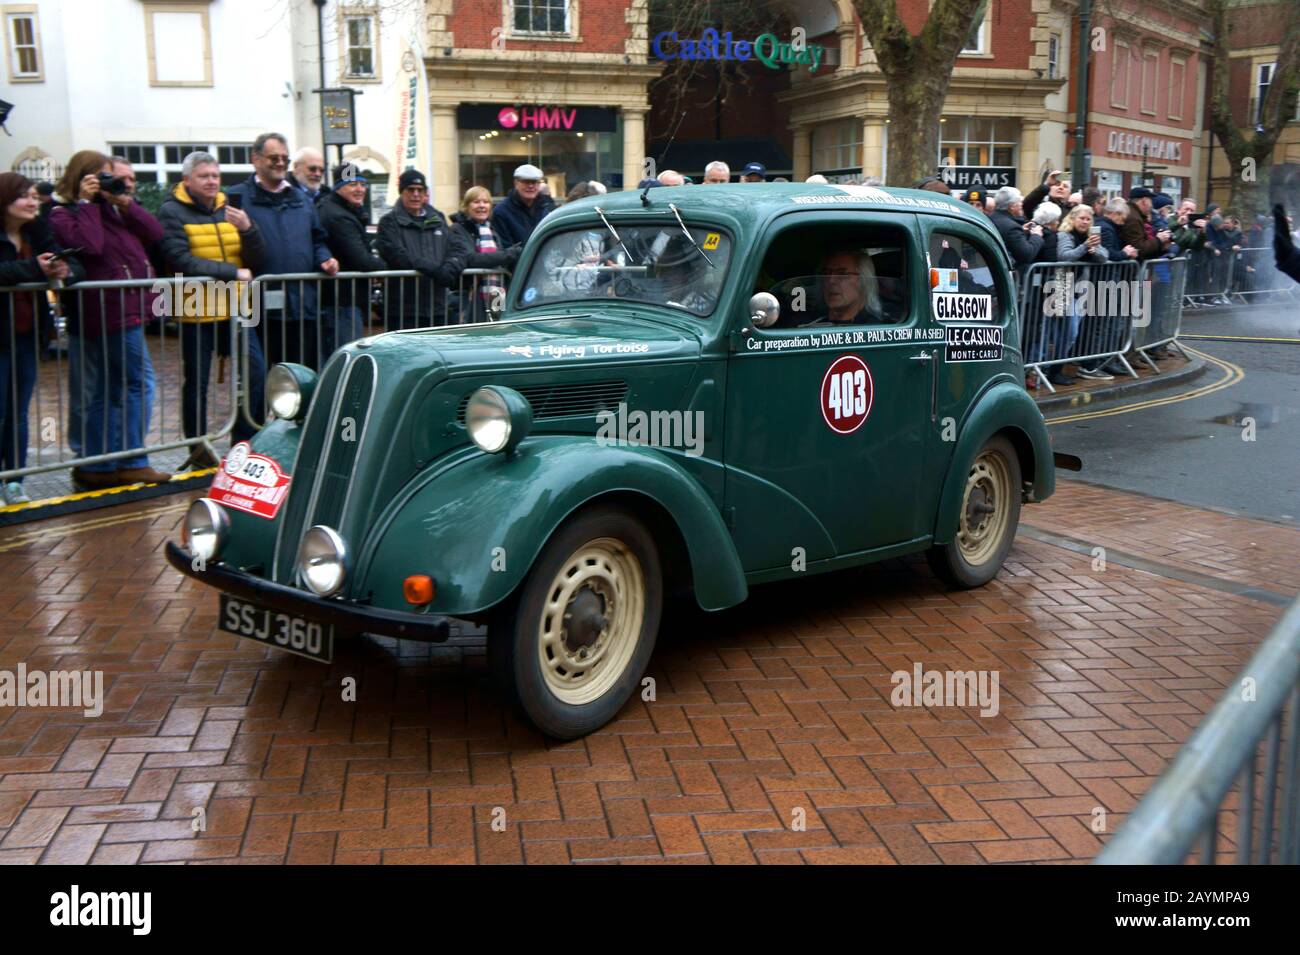 Car Number 403 leaving Passage Control in Banbury on the Rallye Monte-Carlo Historique Stock Photo